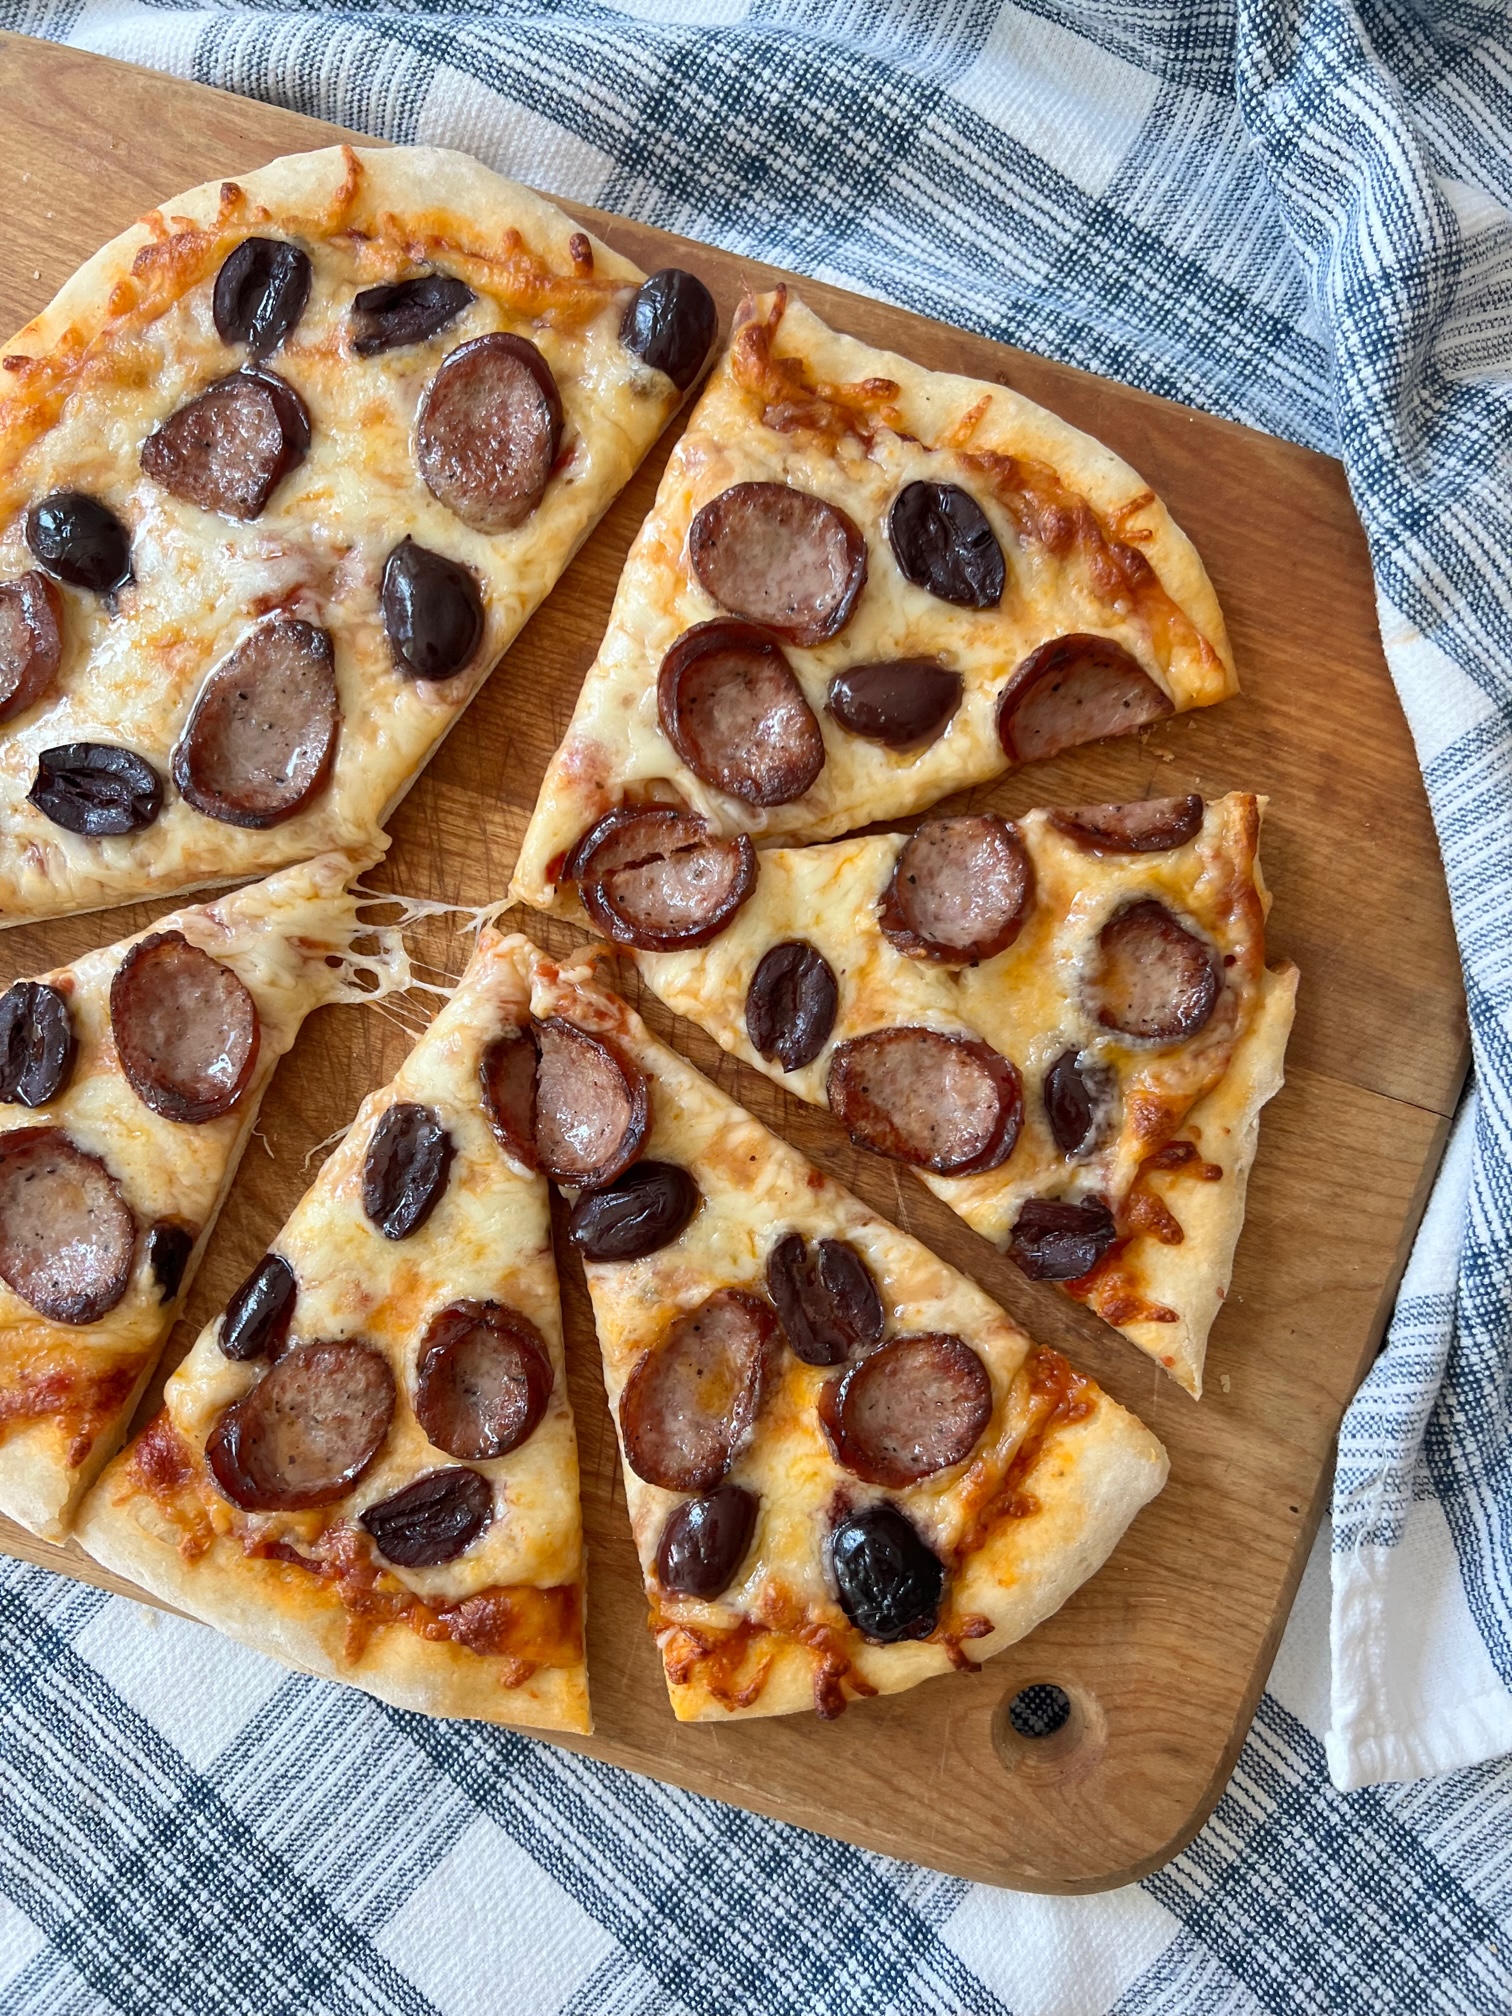 Brazilian Pizza cut into triangles on a wood cutting board on blue and white towel on table.  It's a thin, crispy crust topped with mozzarella cheese, cabresa sausage, and olives.